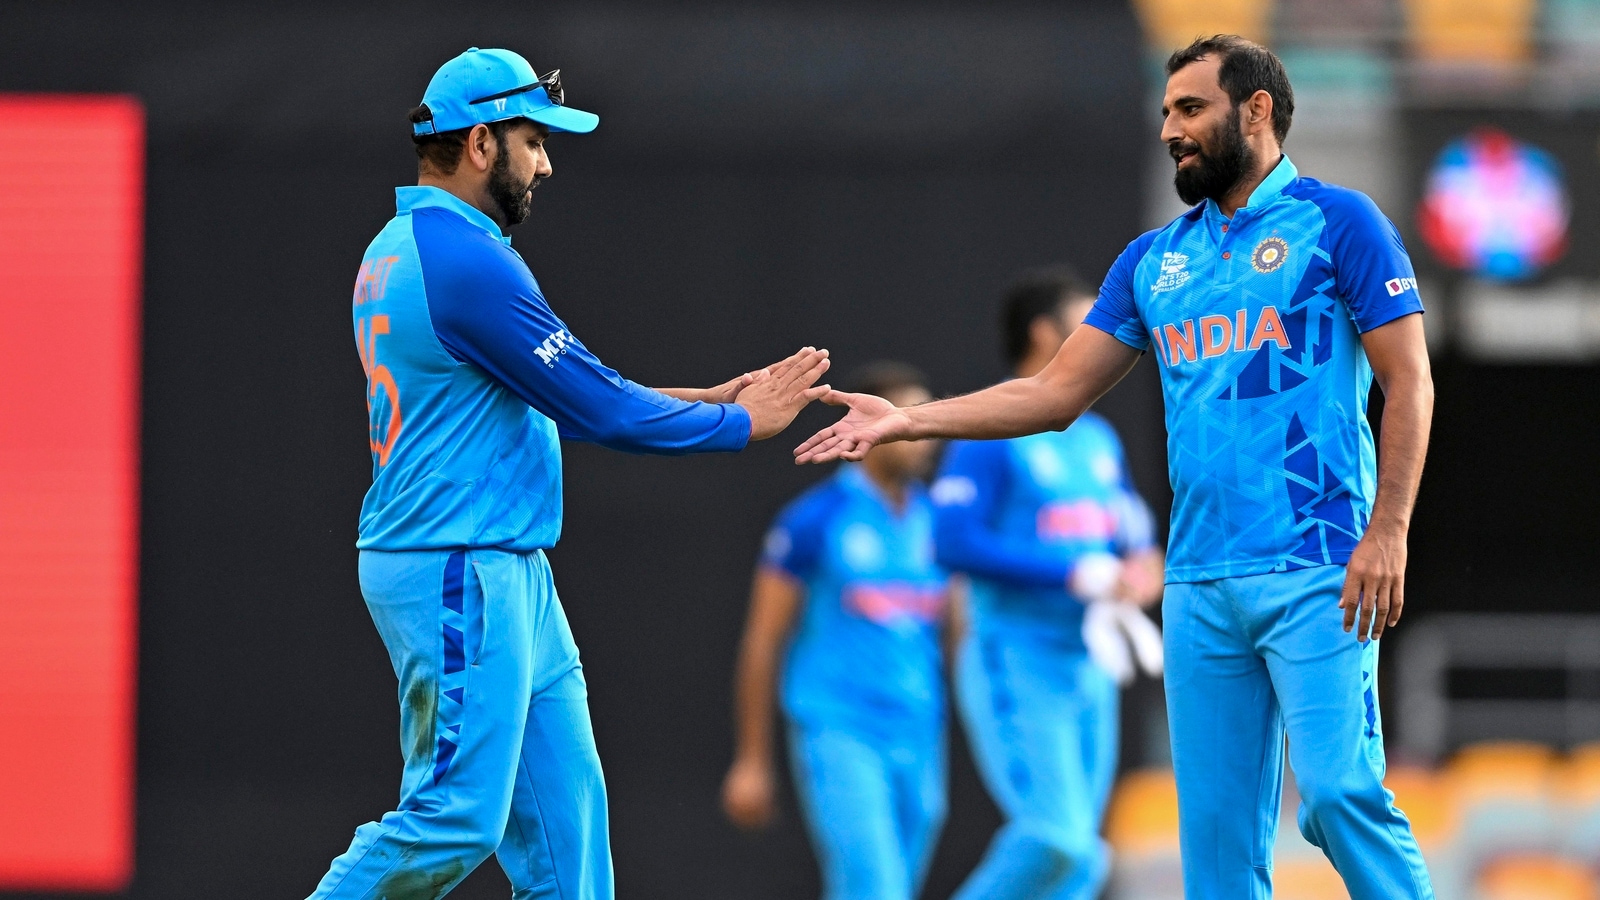 India vs Bangladesh T20 World Cup 2022 Live Streaming When and Where to watch Cricket